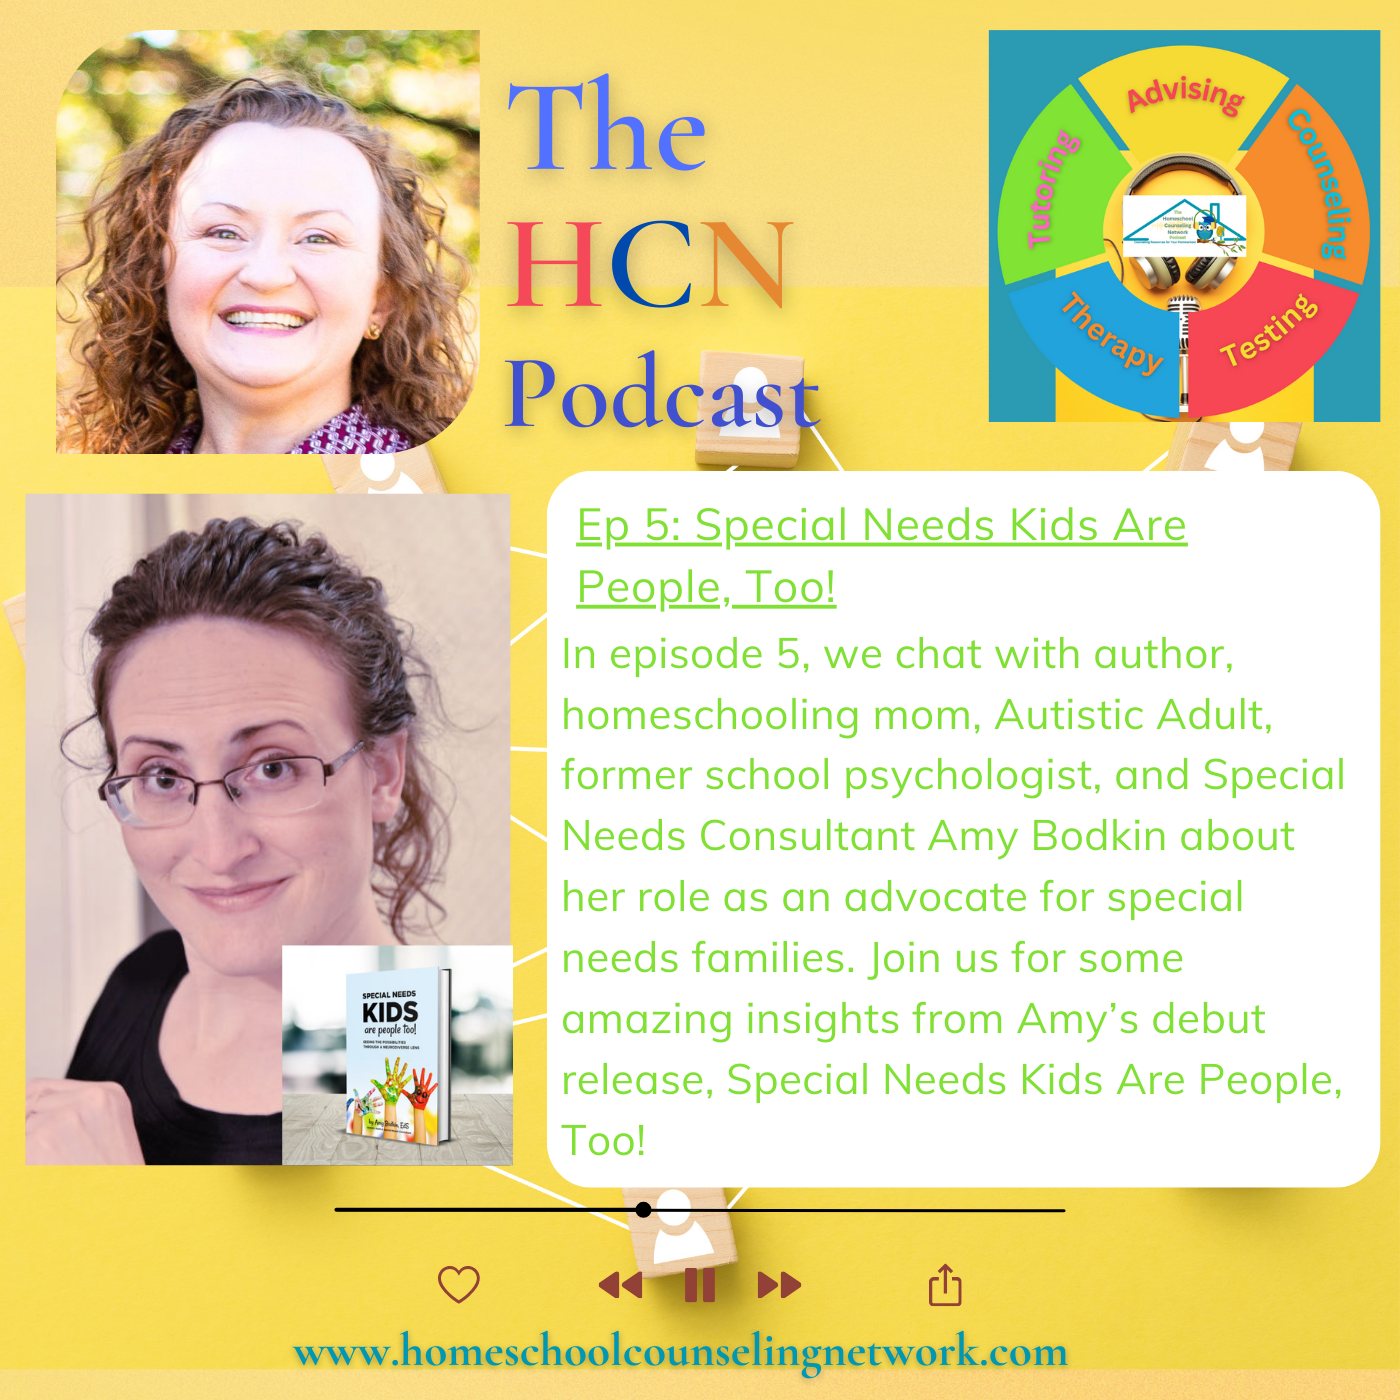 The HCN Podcast – Episode 5: Special Needs Kids Are People, Too!